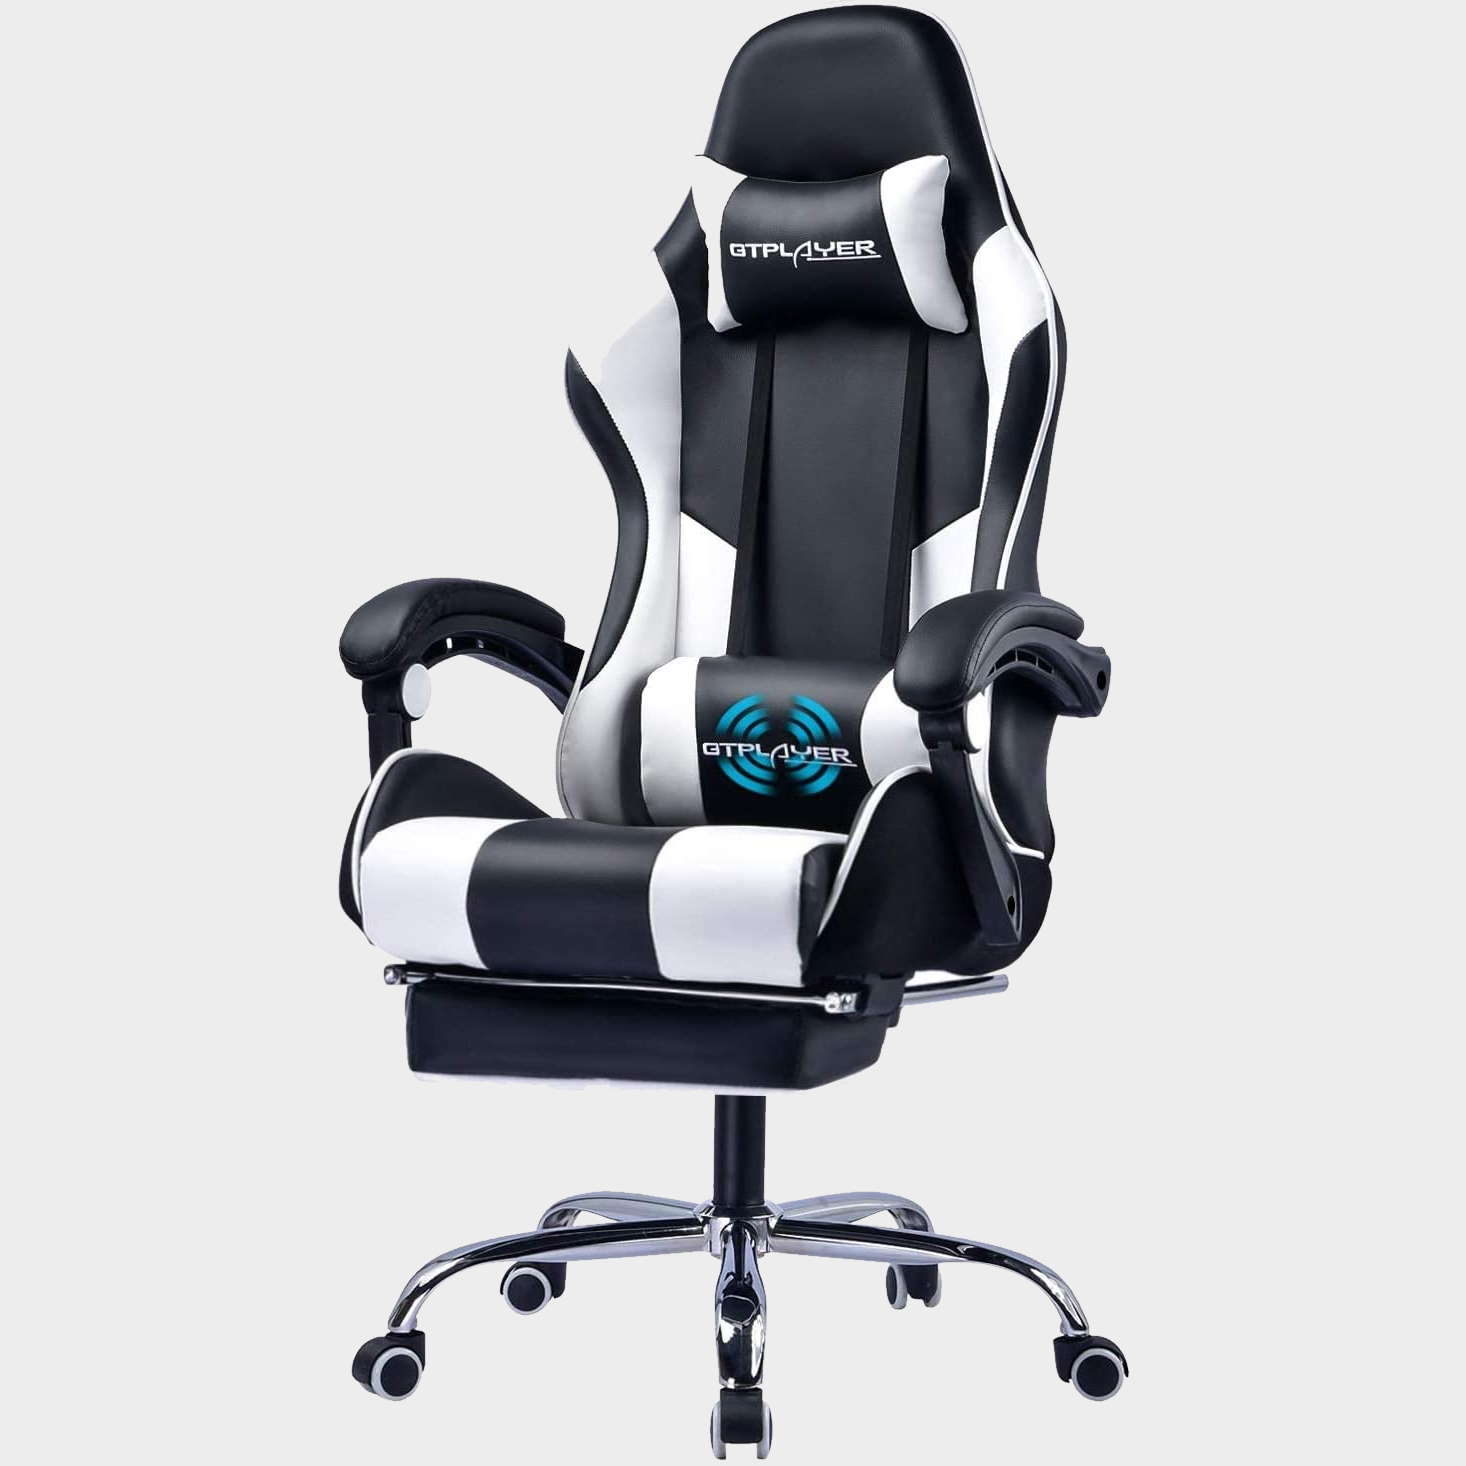 Best cheap gaming chair: Snapshot guide - GAME ZONE